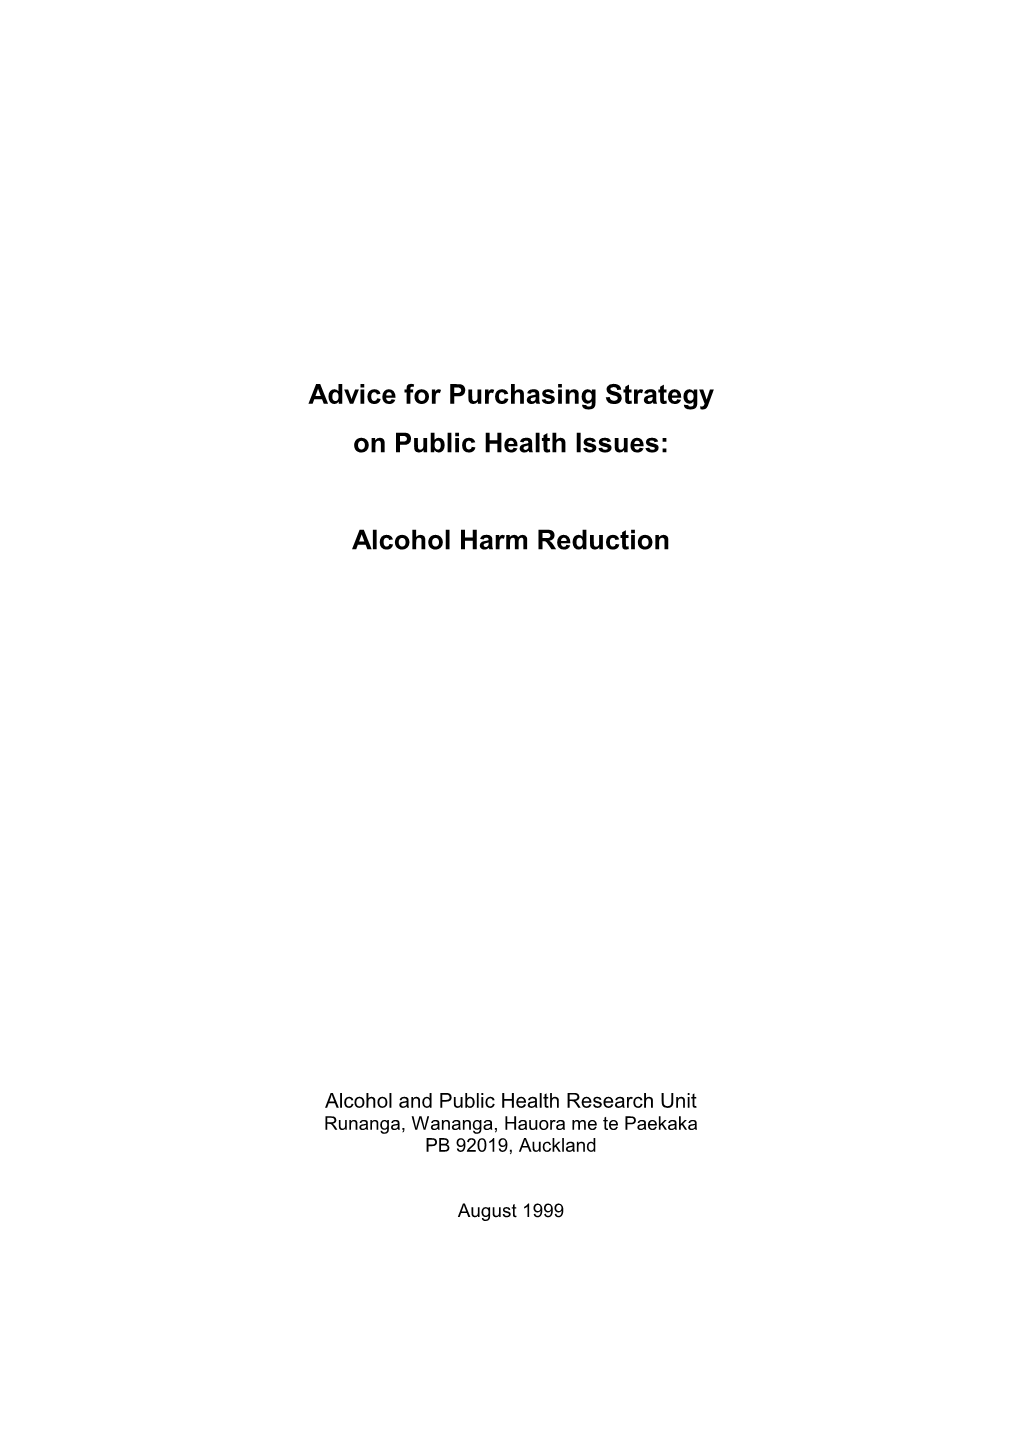 Advice for Purchasing Strategy on Public Health Issues: Alcohol Harm